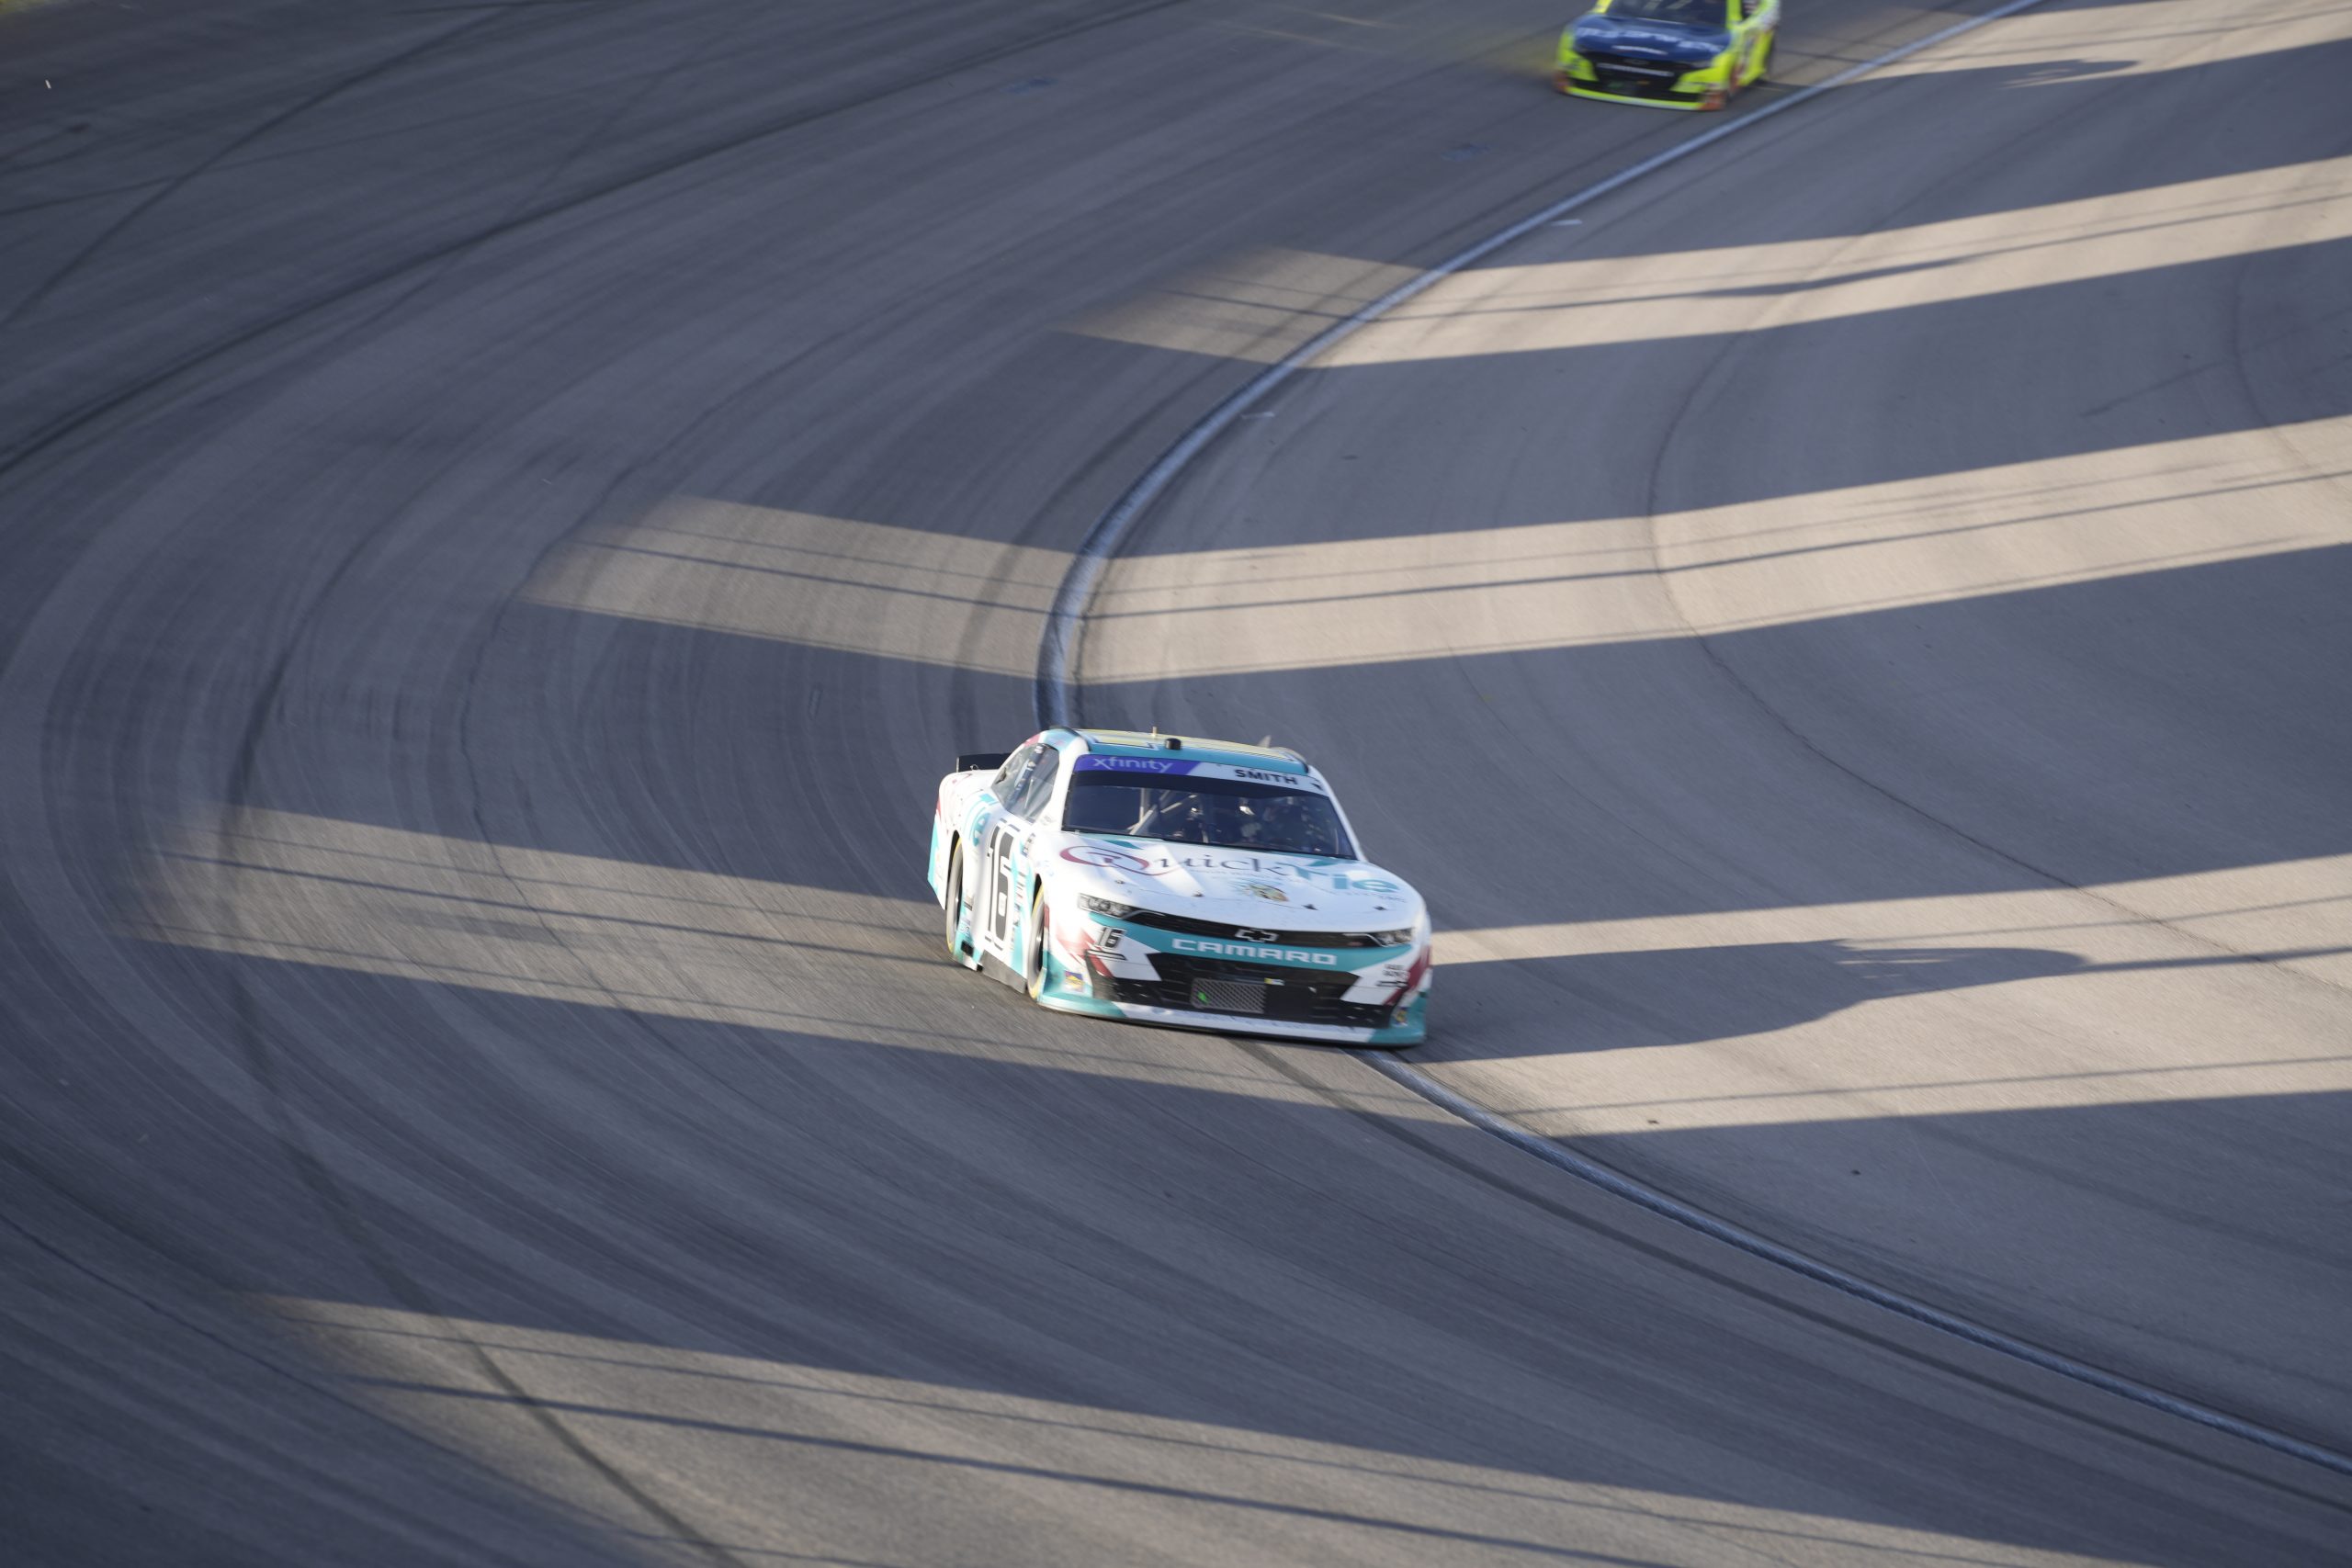 Smith spent a majority of his Saturday afternoon in position for his first Xfinity win. (Photo: Christopher Vargas | The Podium Finish)